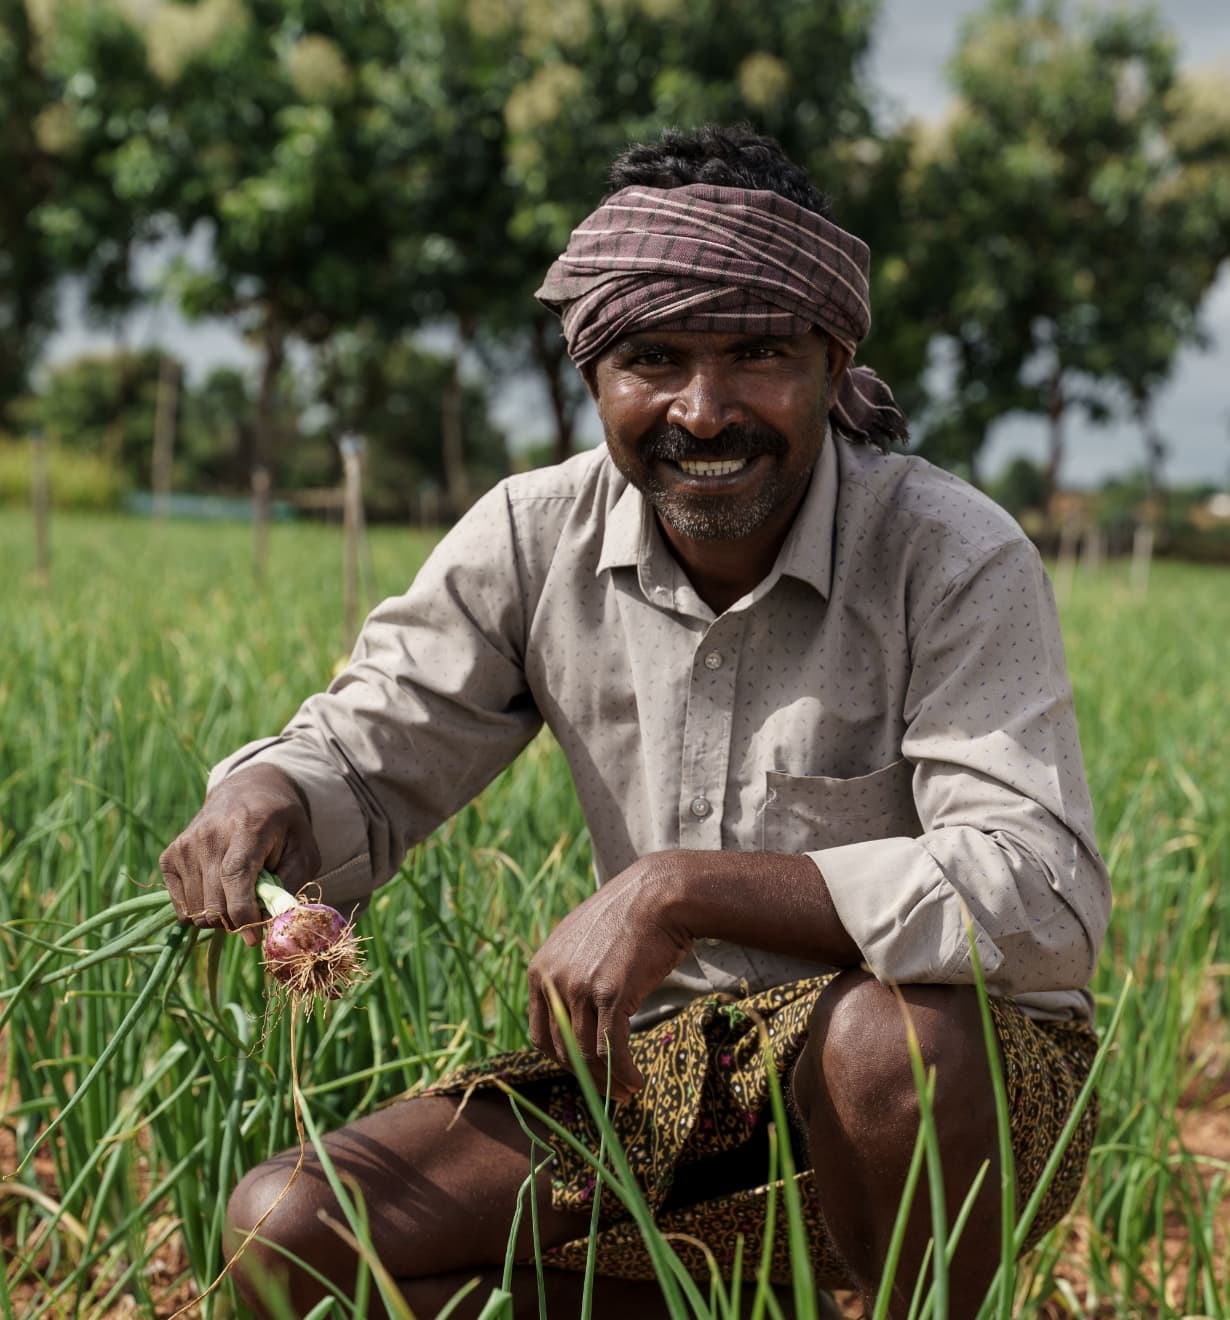 Among the outcomes of the community development programme, almost 250 farmers have acquired new skills and knowledge on organic farming and livestock rearing in India. Photo courtesy of Climate Investor One
